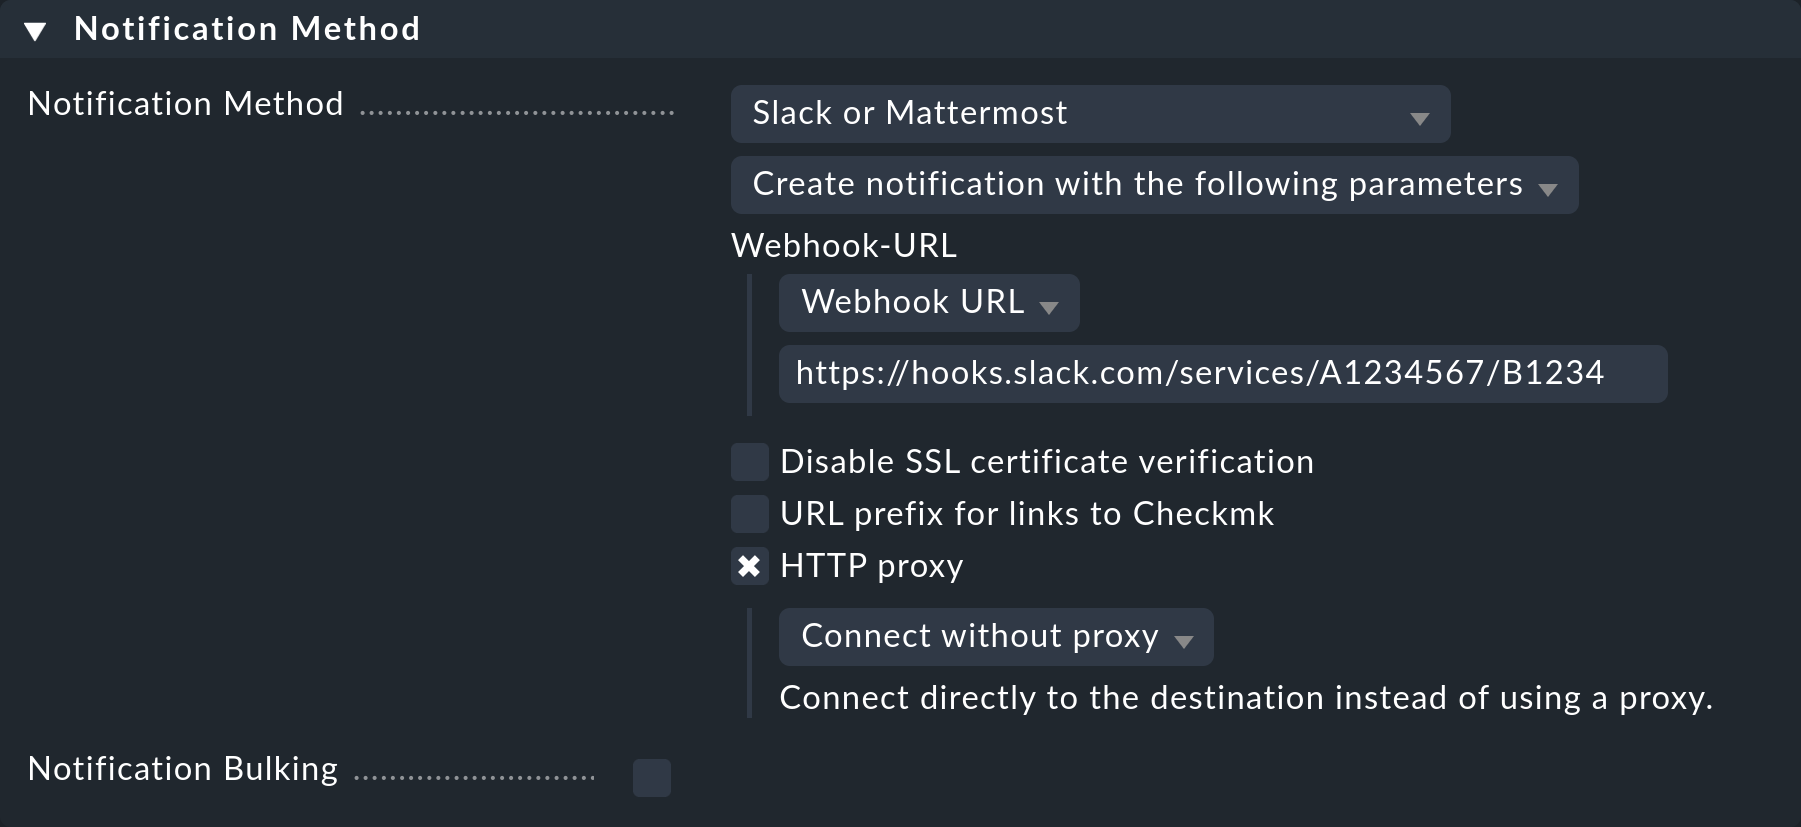 The notification method settings for Slack and Mattermost.